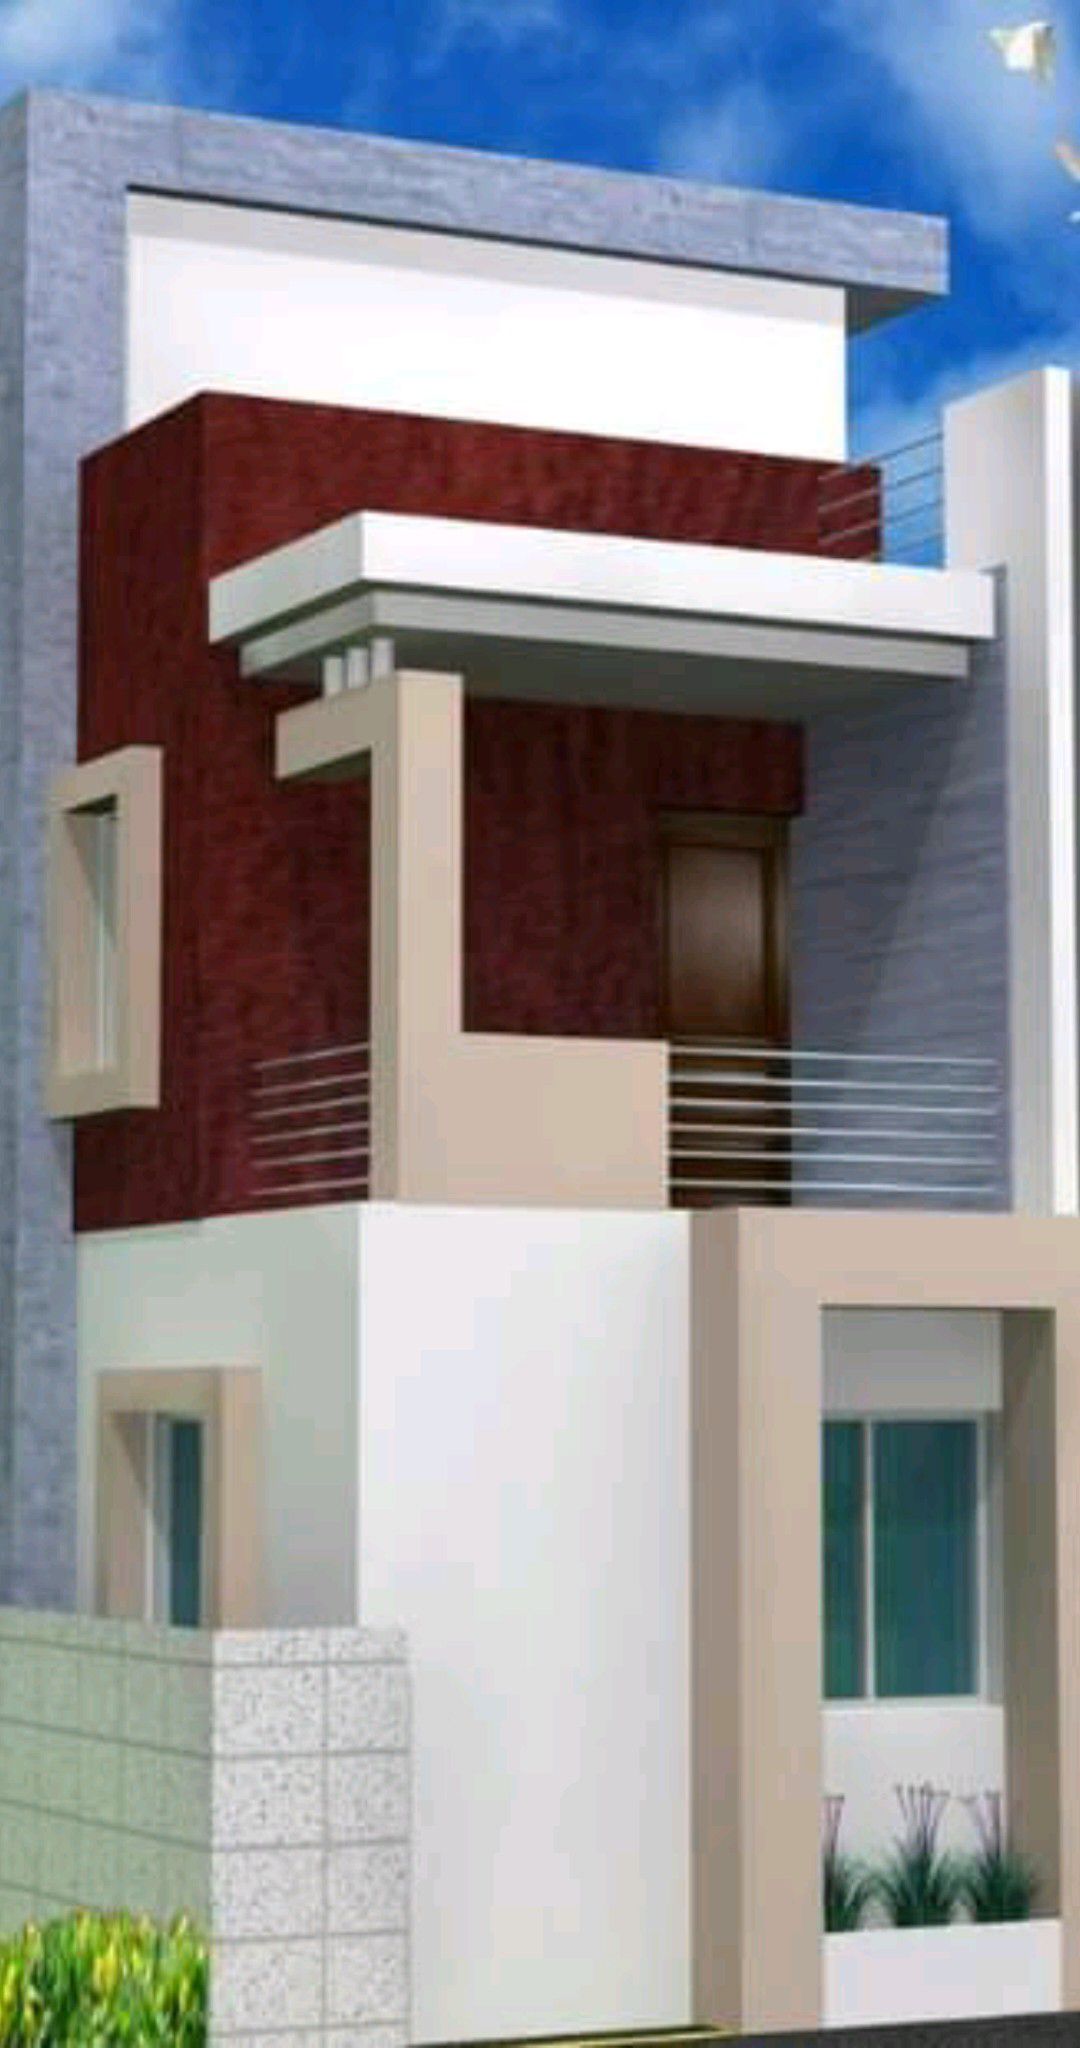 APARTMENT, DUPLEX, TRIPLEX,RESIDENTIAL AND COMMERCIAL LAND SALE IN BHUBANESWAR AND CUTTACK LOCATION